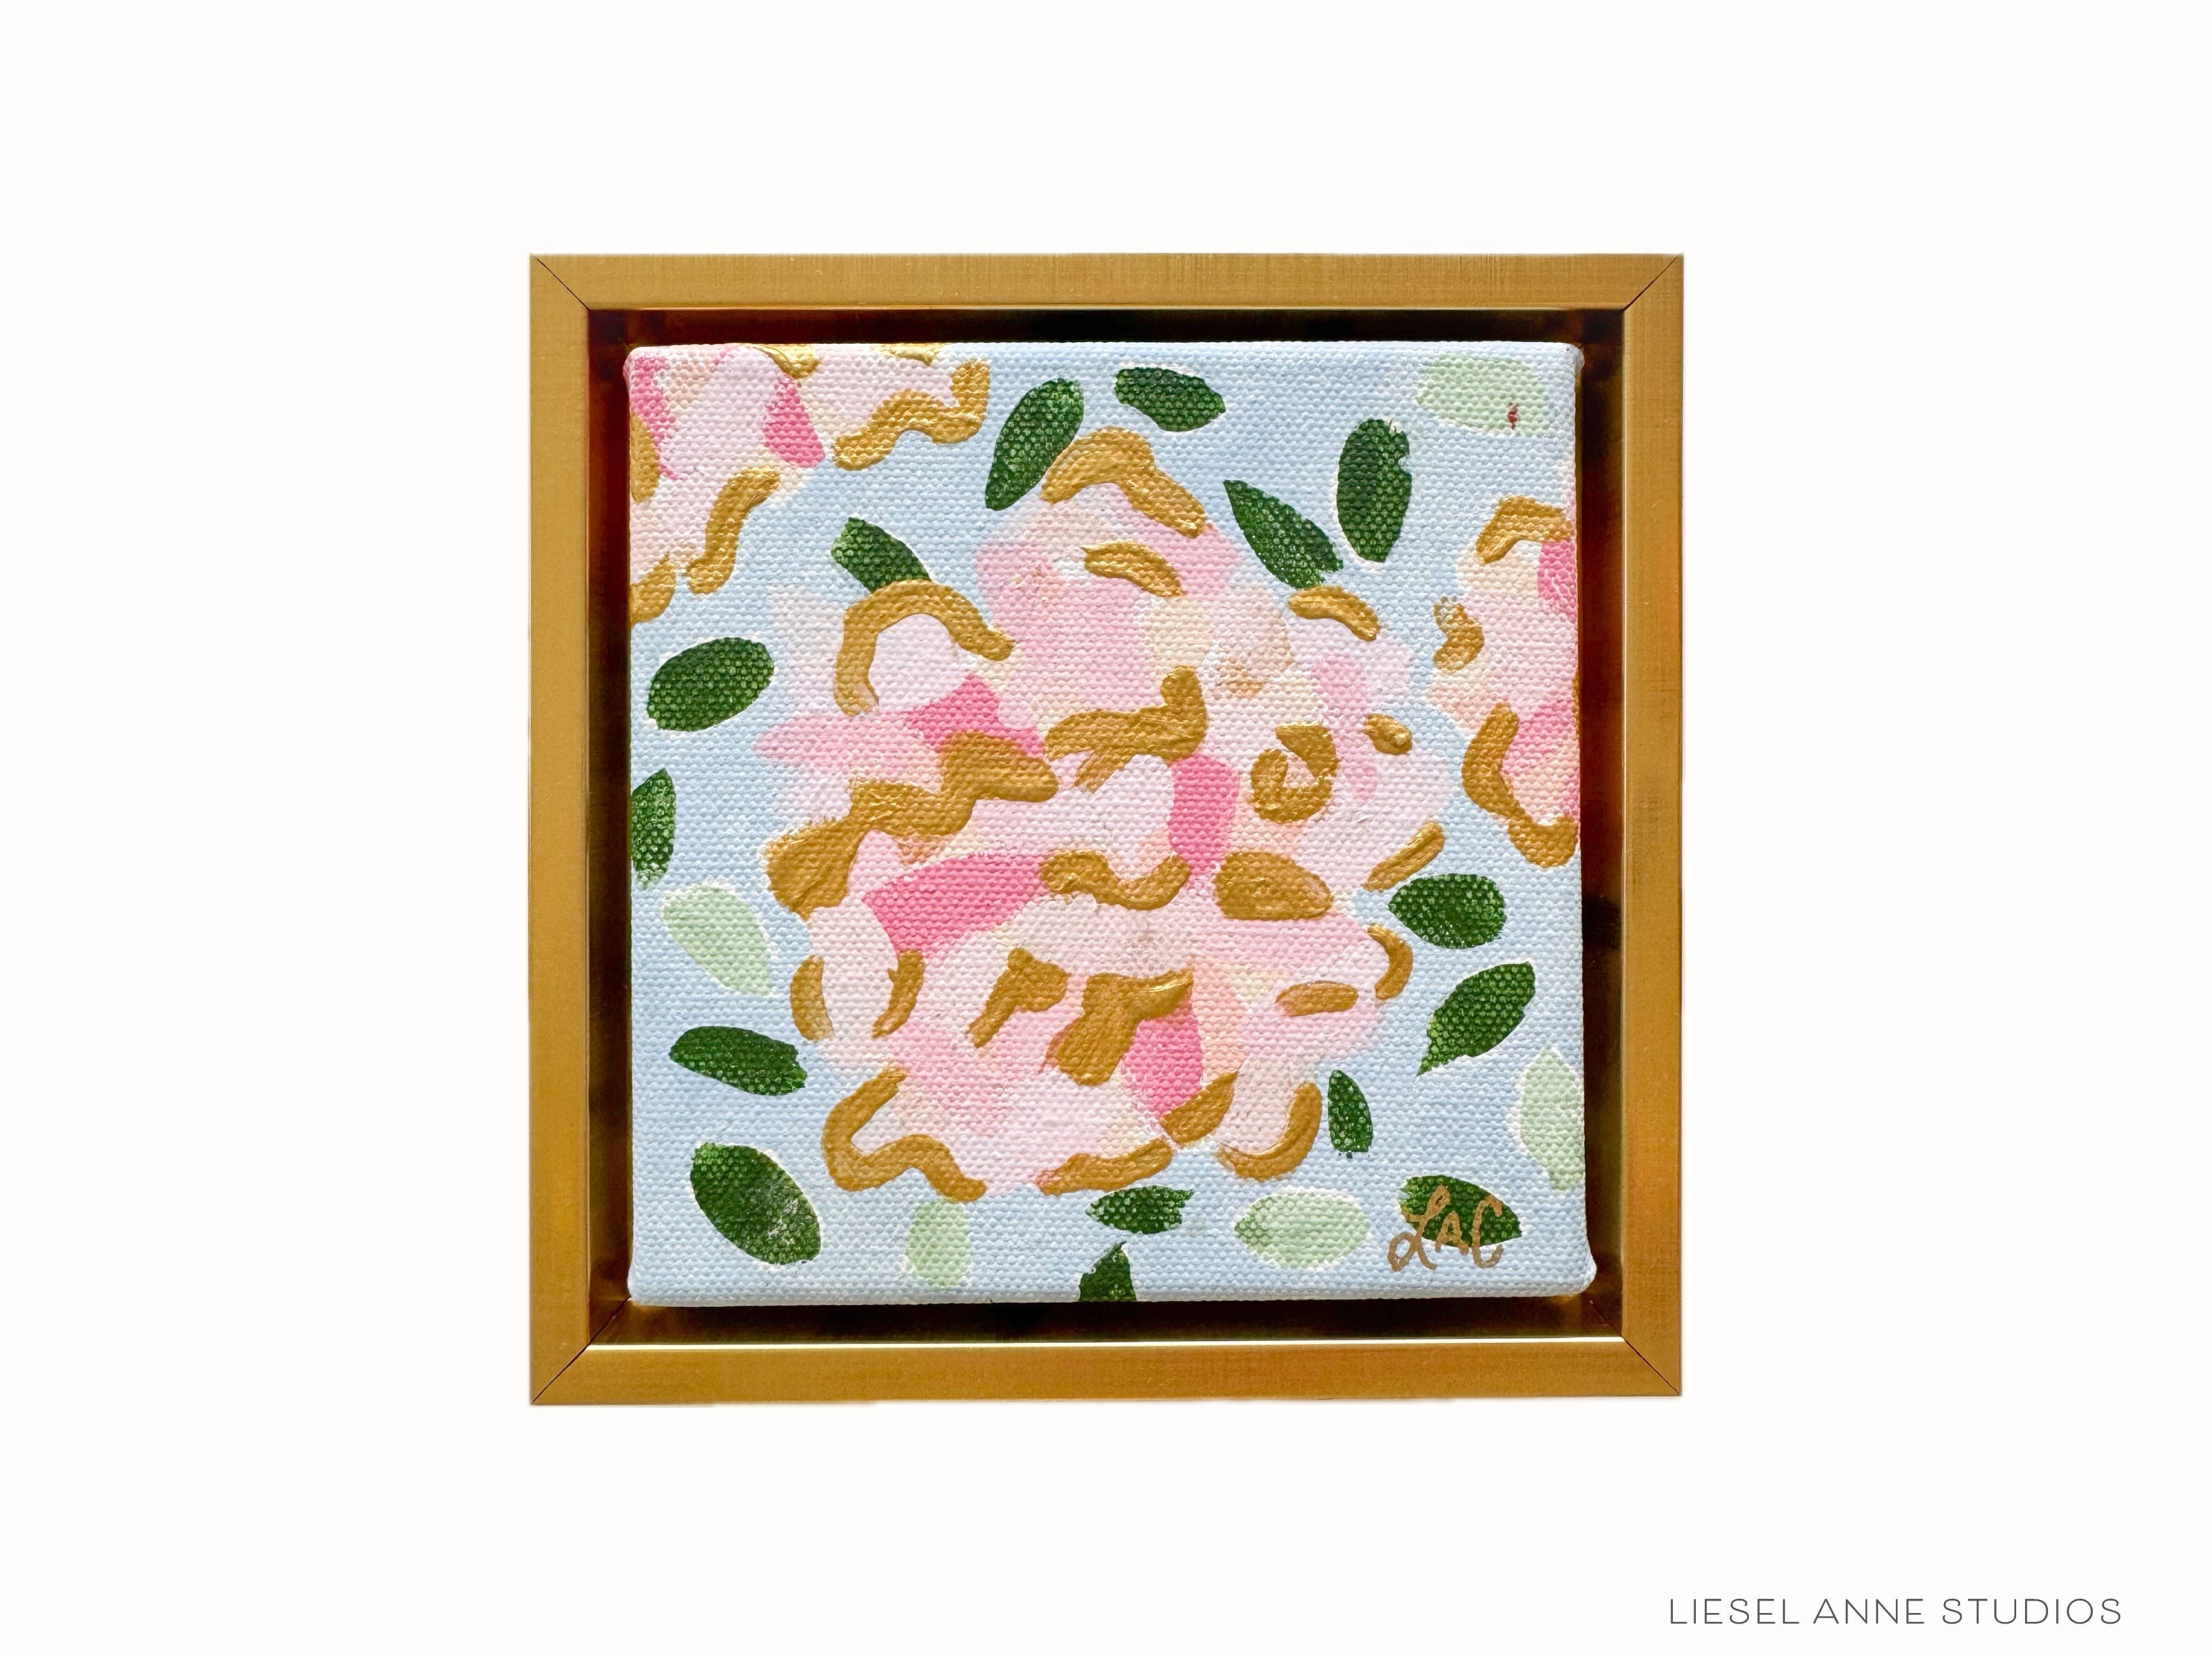 Golden Hydrangea Mini | Blue & Pink XVII-Original artwork measures 5"x5" | Framed in gold wood floater frame | Hand-Painted with gouache on stretched canvas | Features our signature Golden Hydrangea design with a light blue base, pink hydrangeas and shimmery gold accents | Initialed in gold by the Liesel Anne (the artist) on the front and signed and dated on the back-The Singing Little Bird